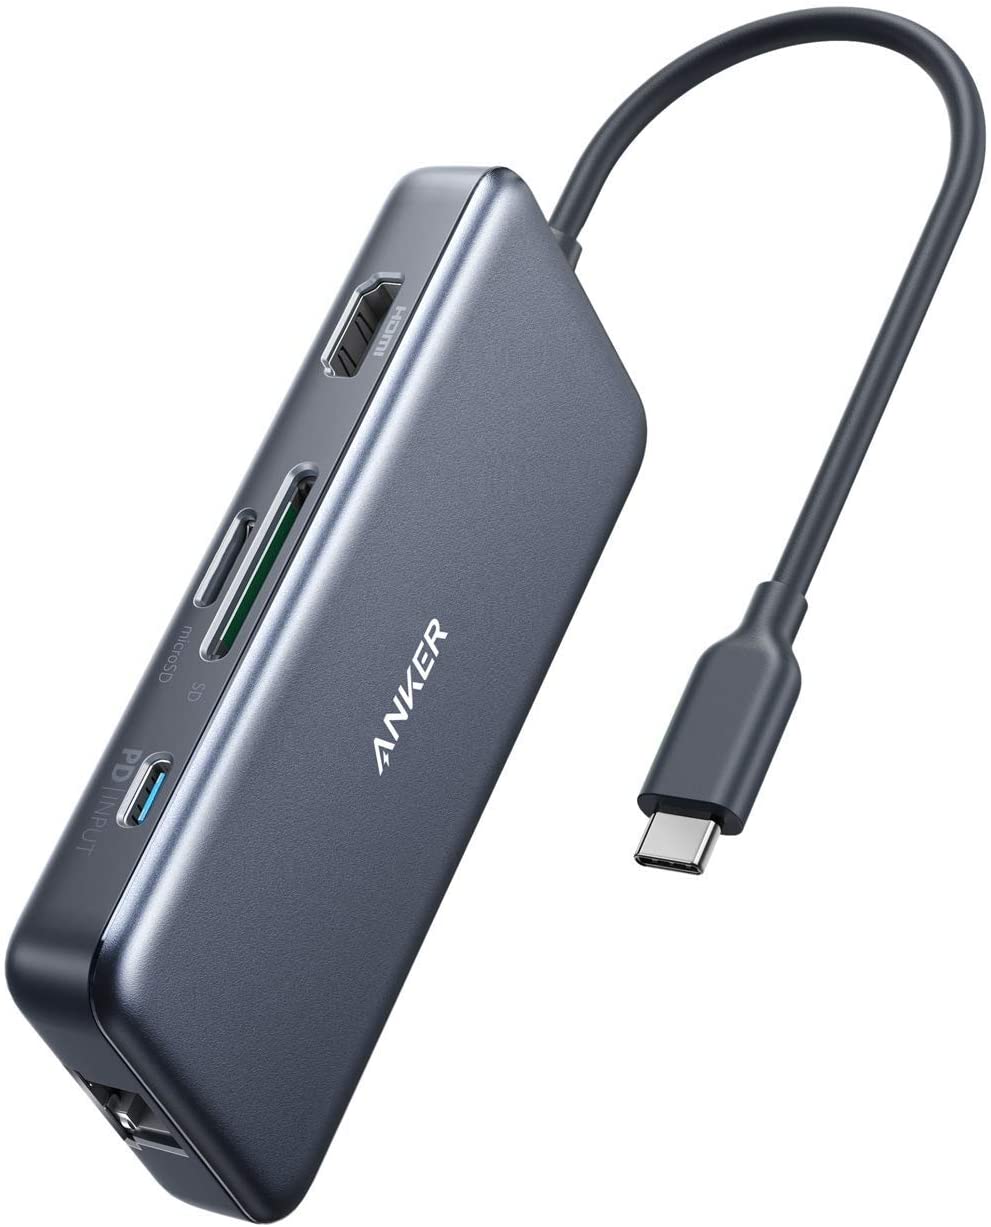 Anker A8352 PowerExpand+ 7-in-1 USB-C PD Ethernet Hub